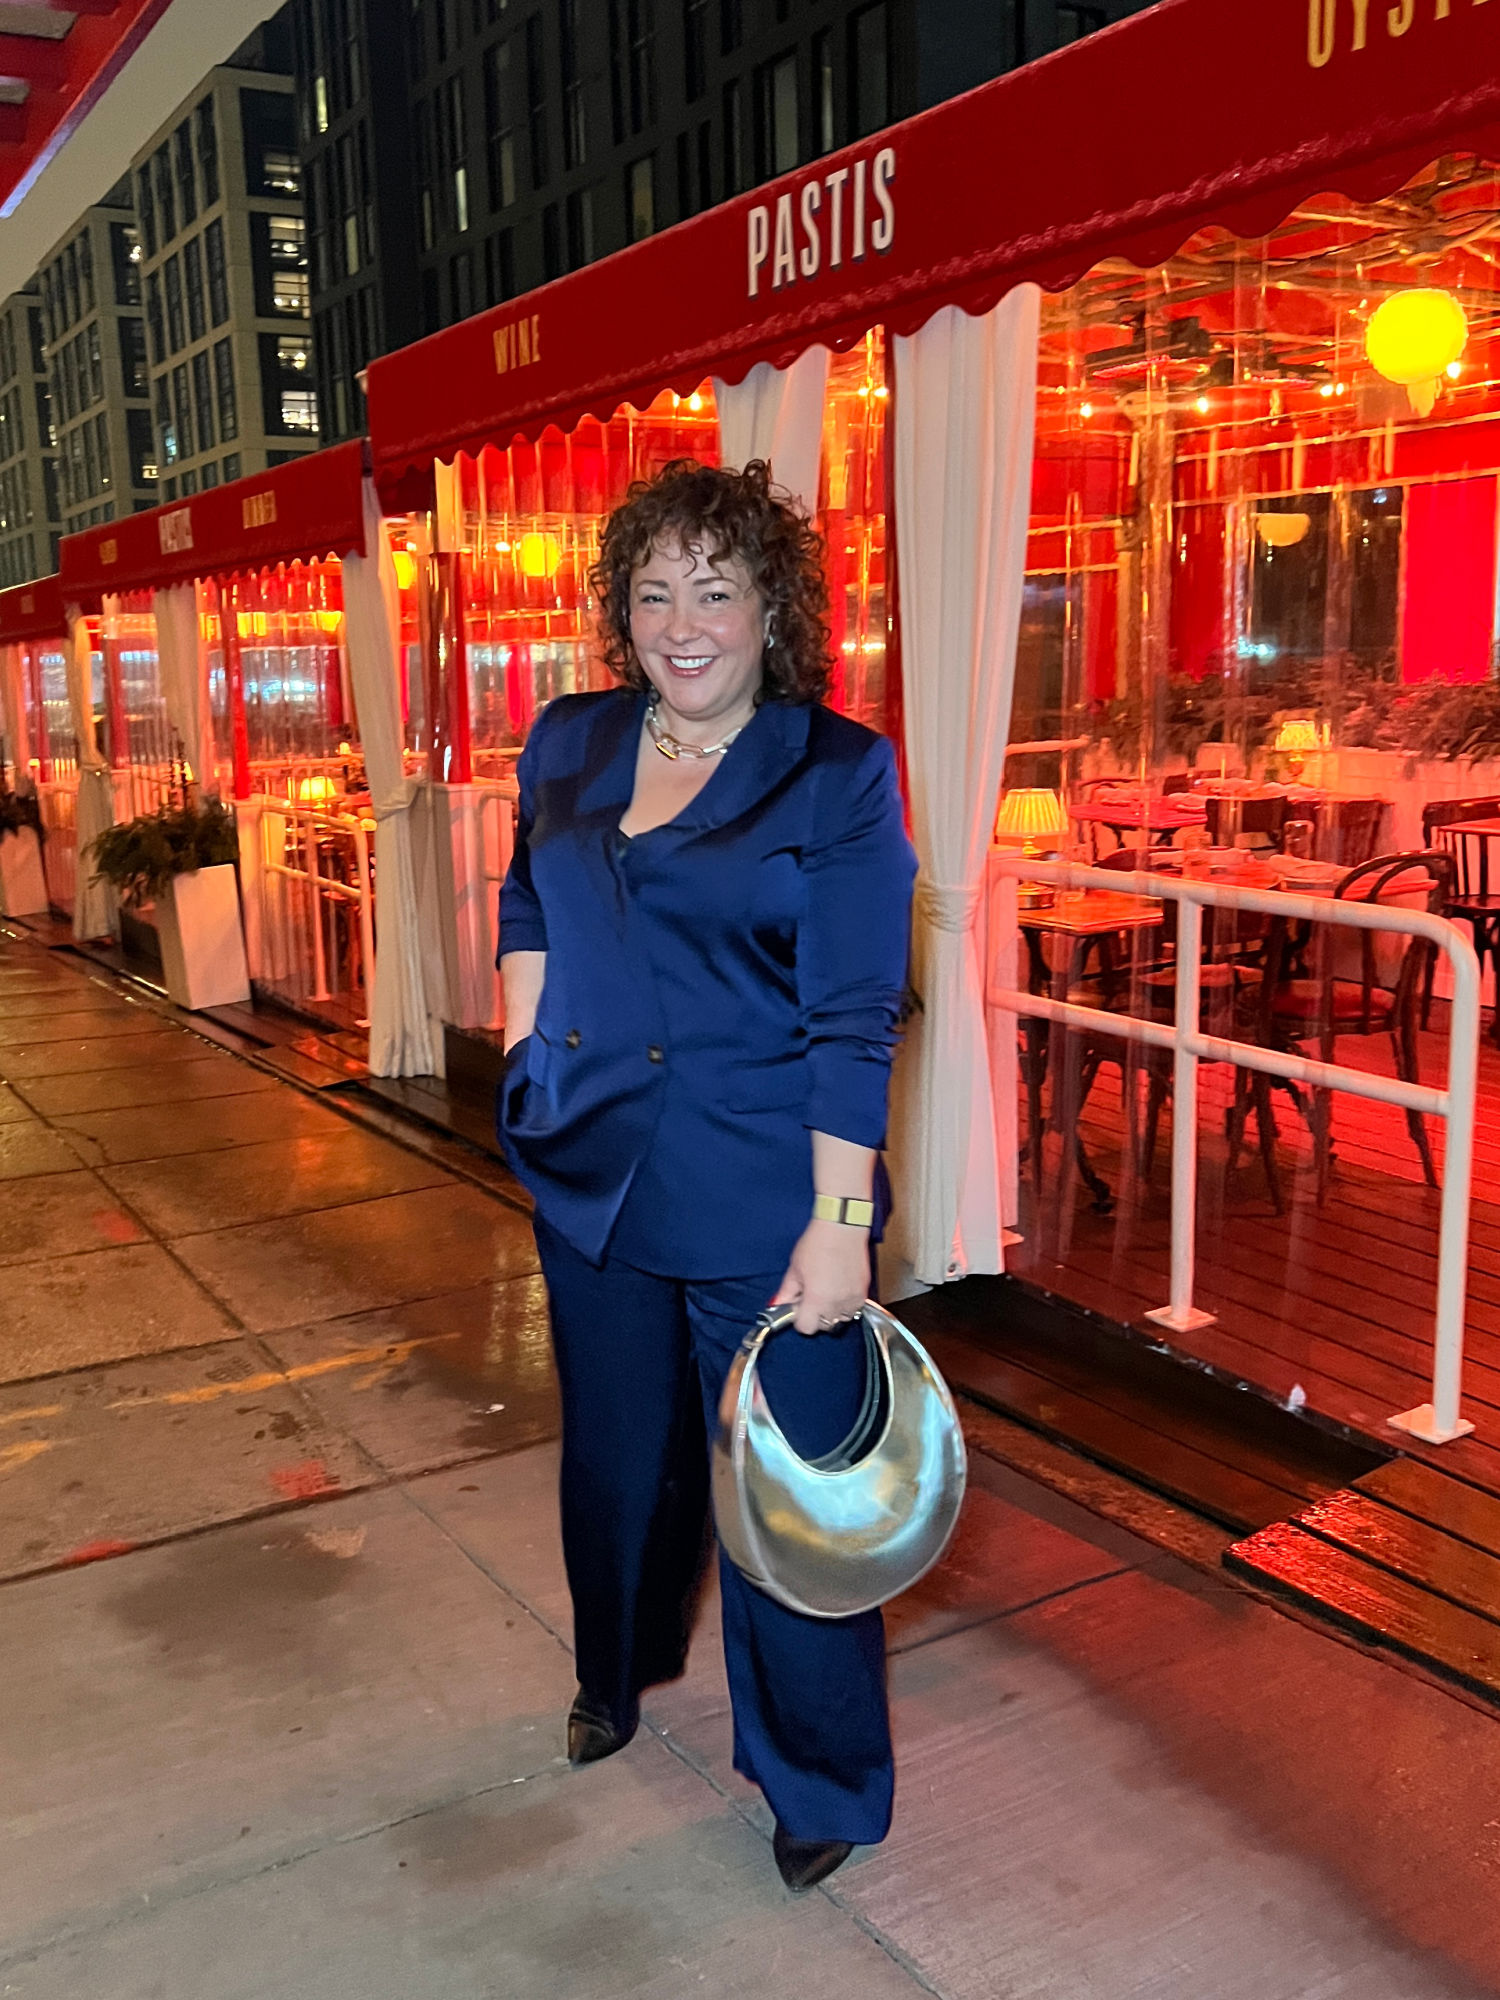 Alison Gary of Wardrobe Oxygen at Pastis DC. She is standing outside the restaurant in the Union Market District, in a shiny navy pantsuit, a silver bag in her hand. She has one hand in her pocket and she is smiling at the camera.